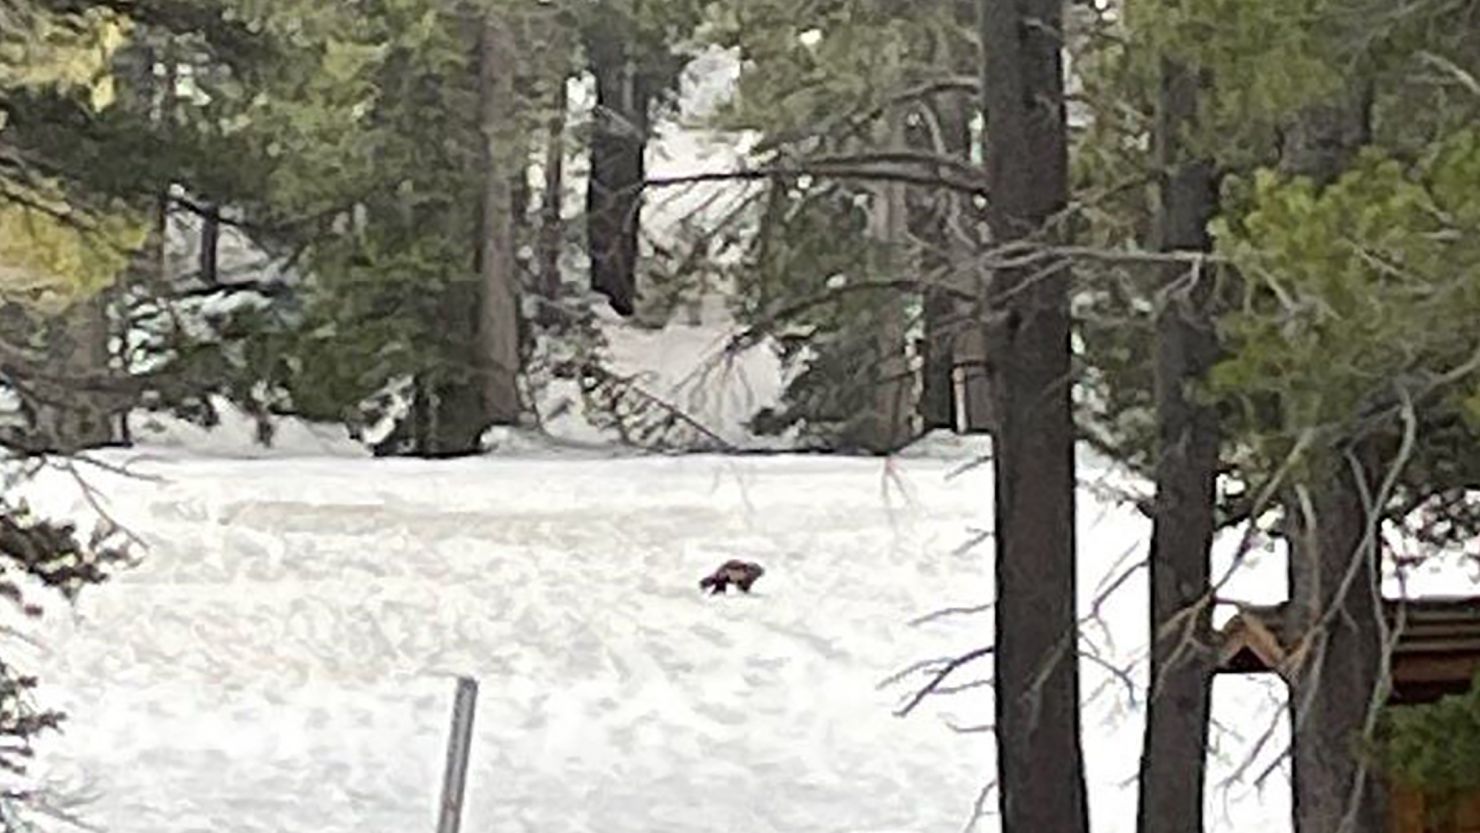 Rare wolverine sightings in California have been verified by scientists, marking just the second time in century the animal has been spotted in the Golden State.